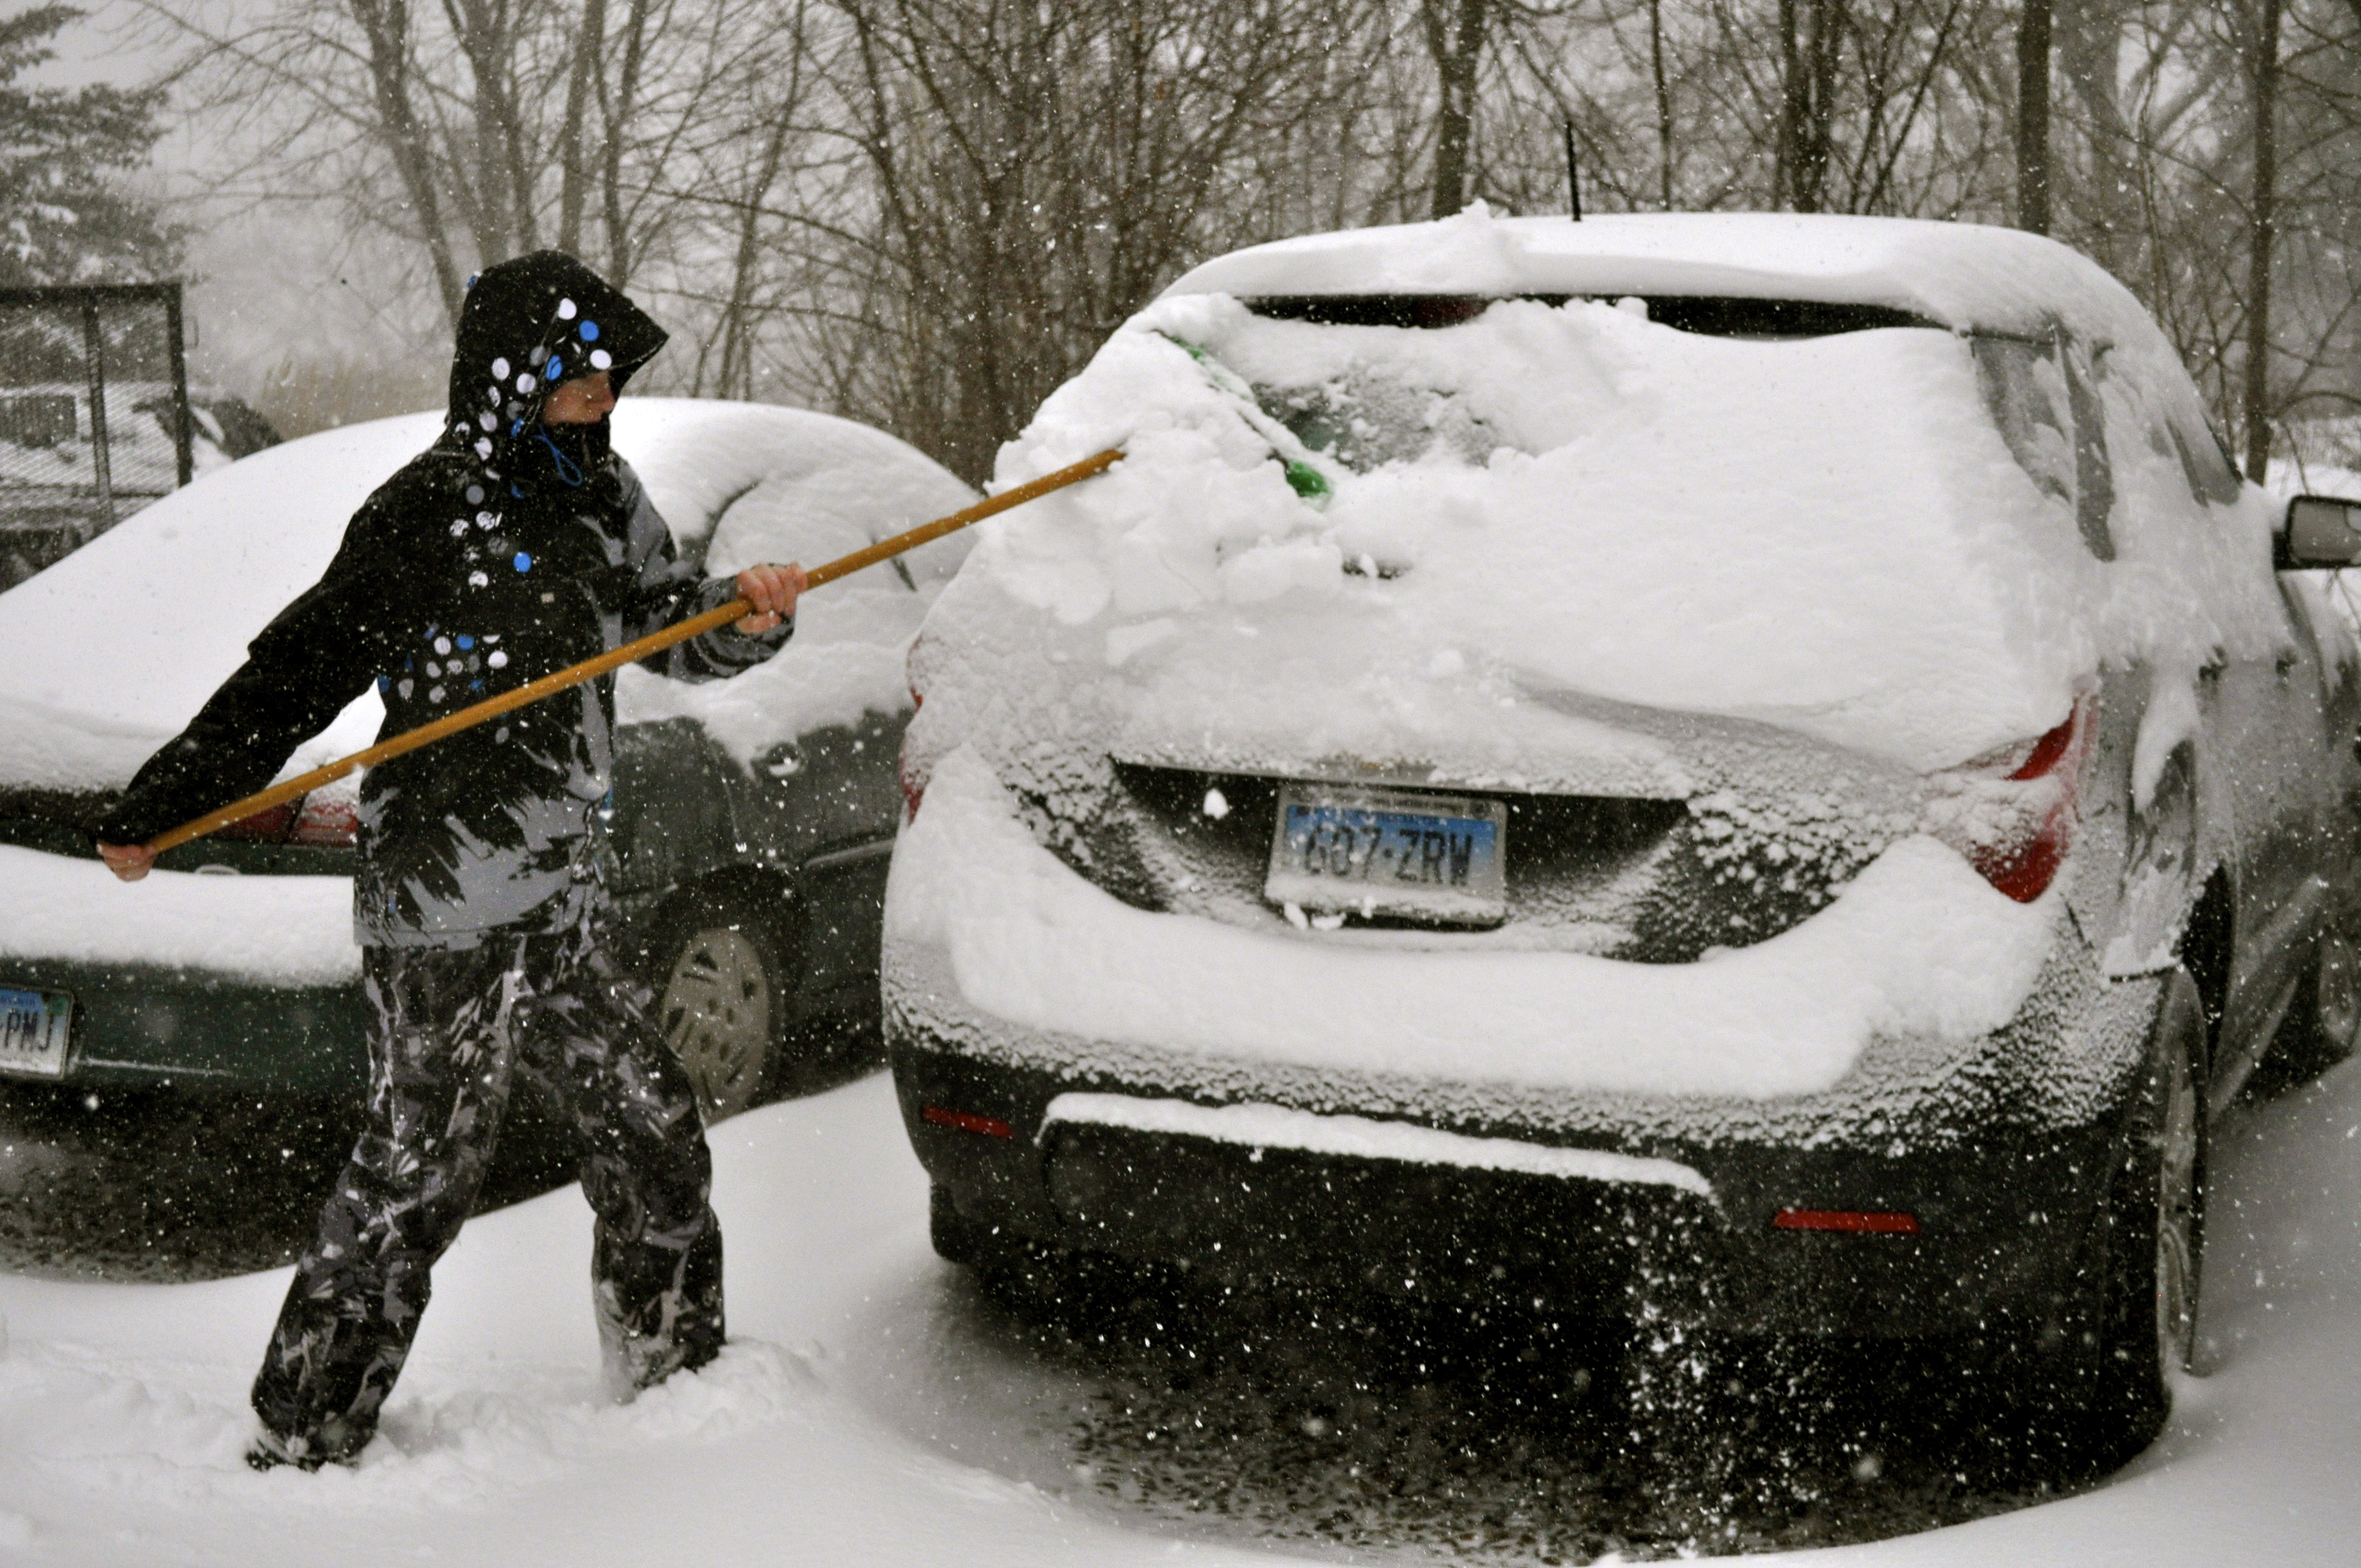 PHOTOS:: The effects of the Blizzard of 2013